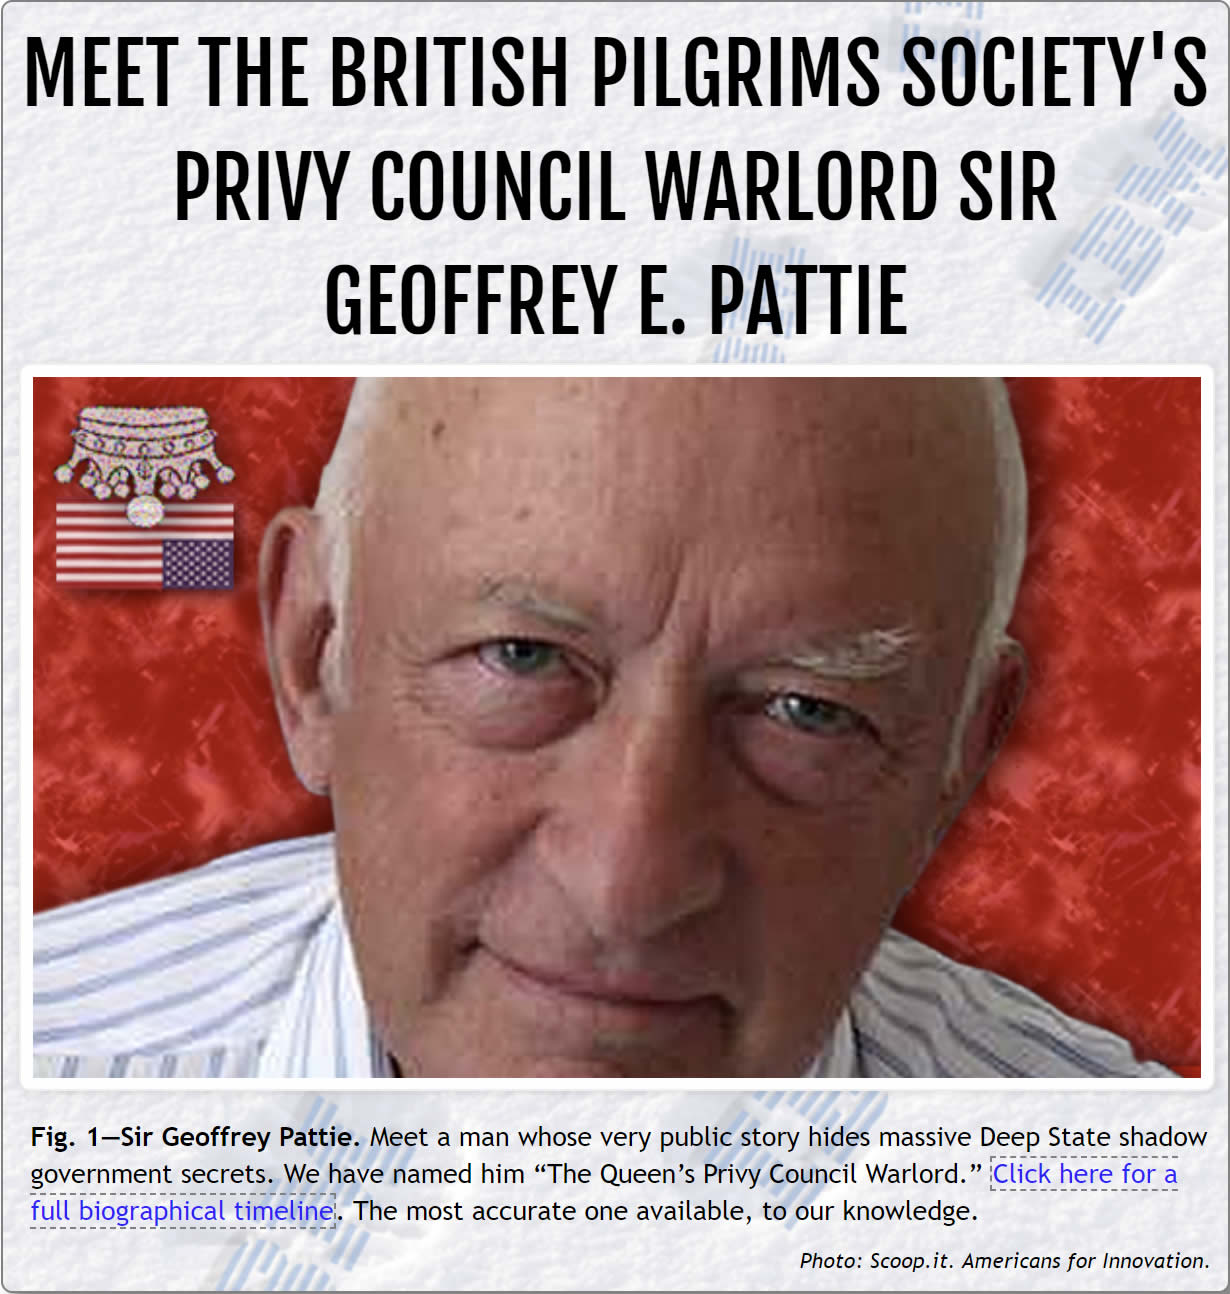 Sir Geoffrey E. Pattie, British Warlord and founder of SERCO